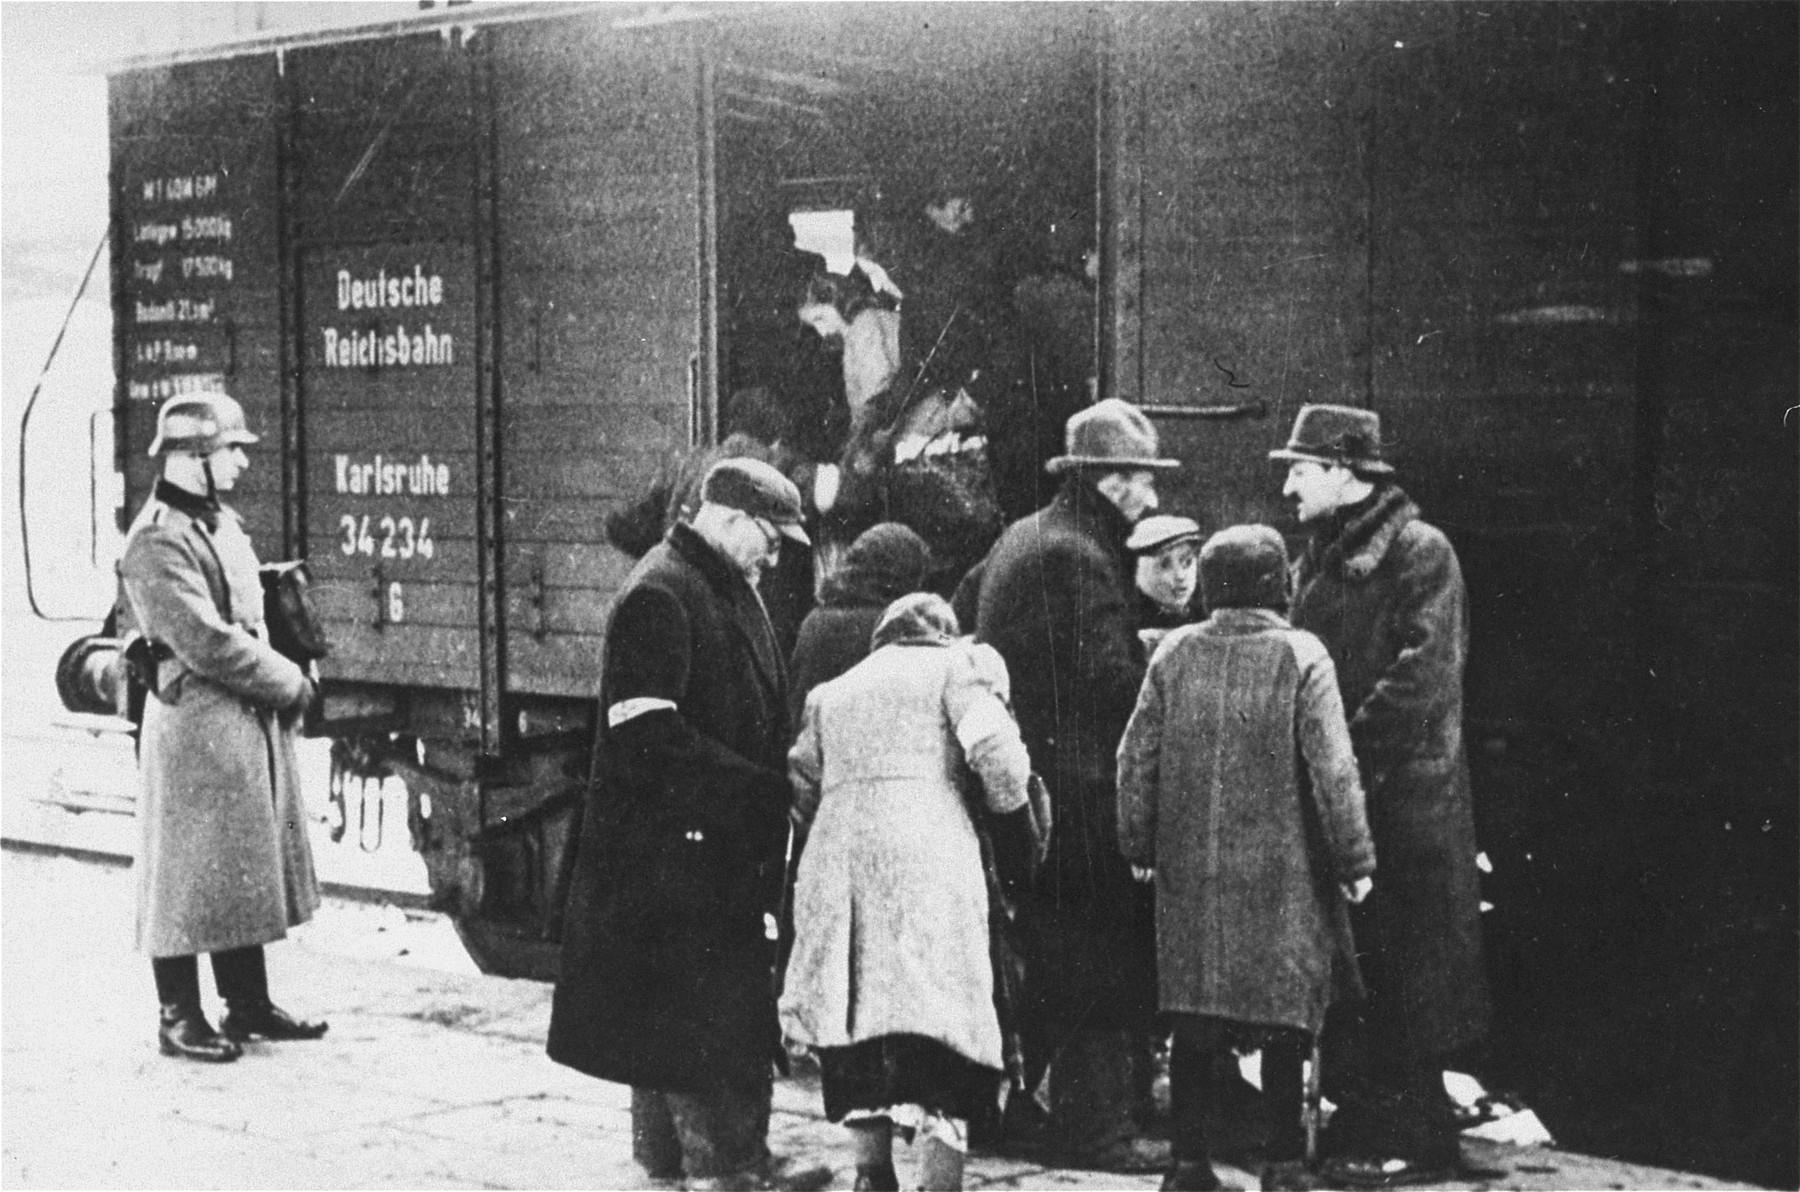 A member of the German SS supervises the boarding of Jews onto trains during a deportation action in the Krakow ghetto.